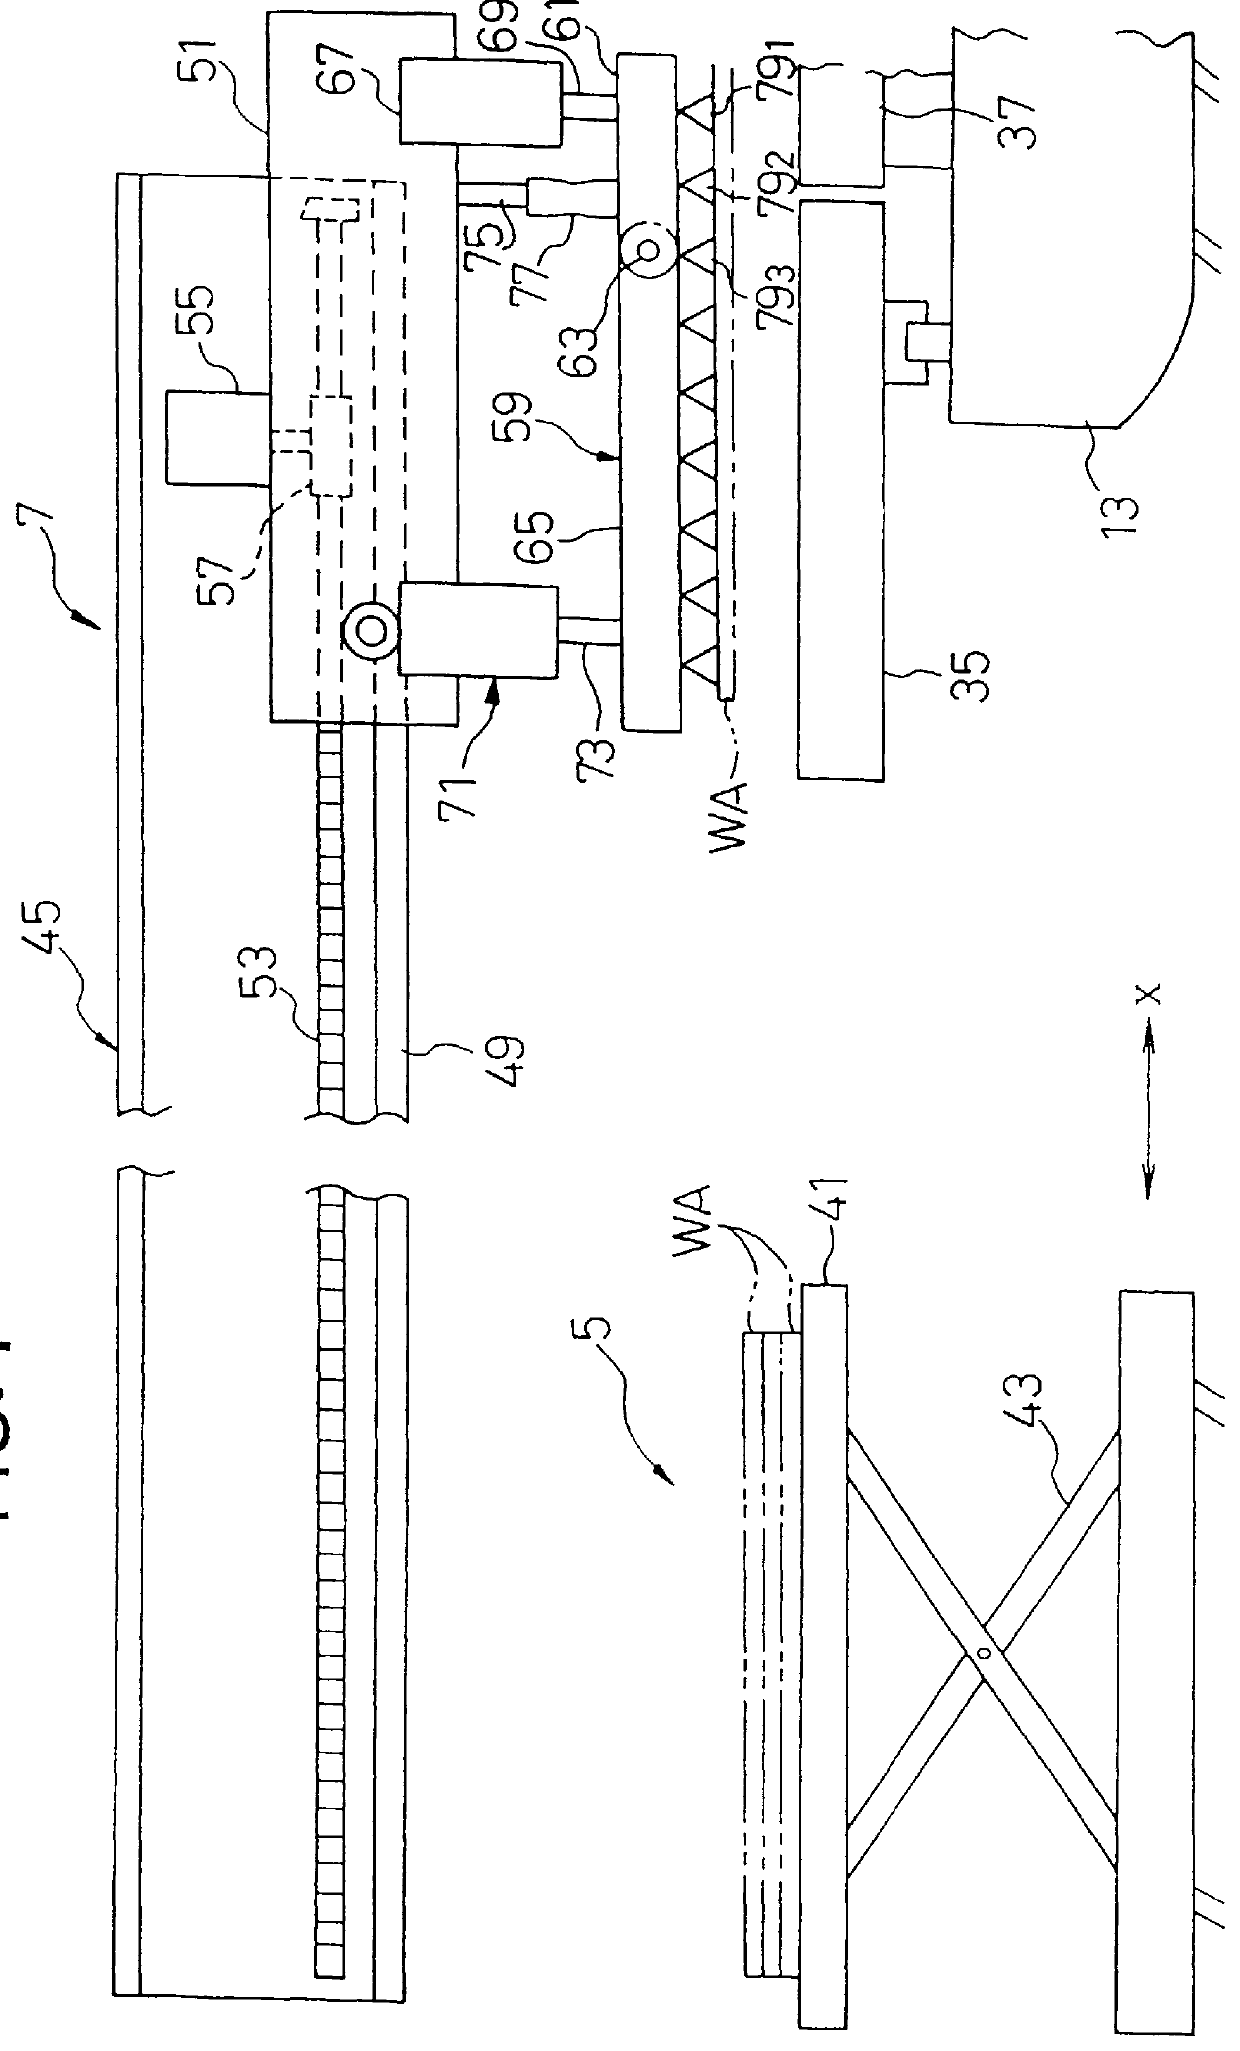 Punched plate material carrying-out system